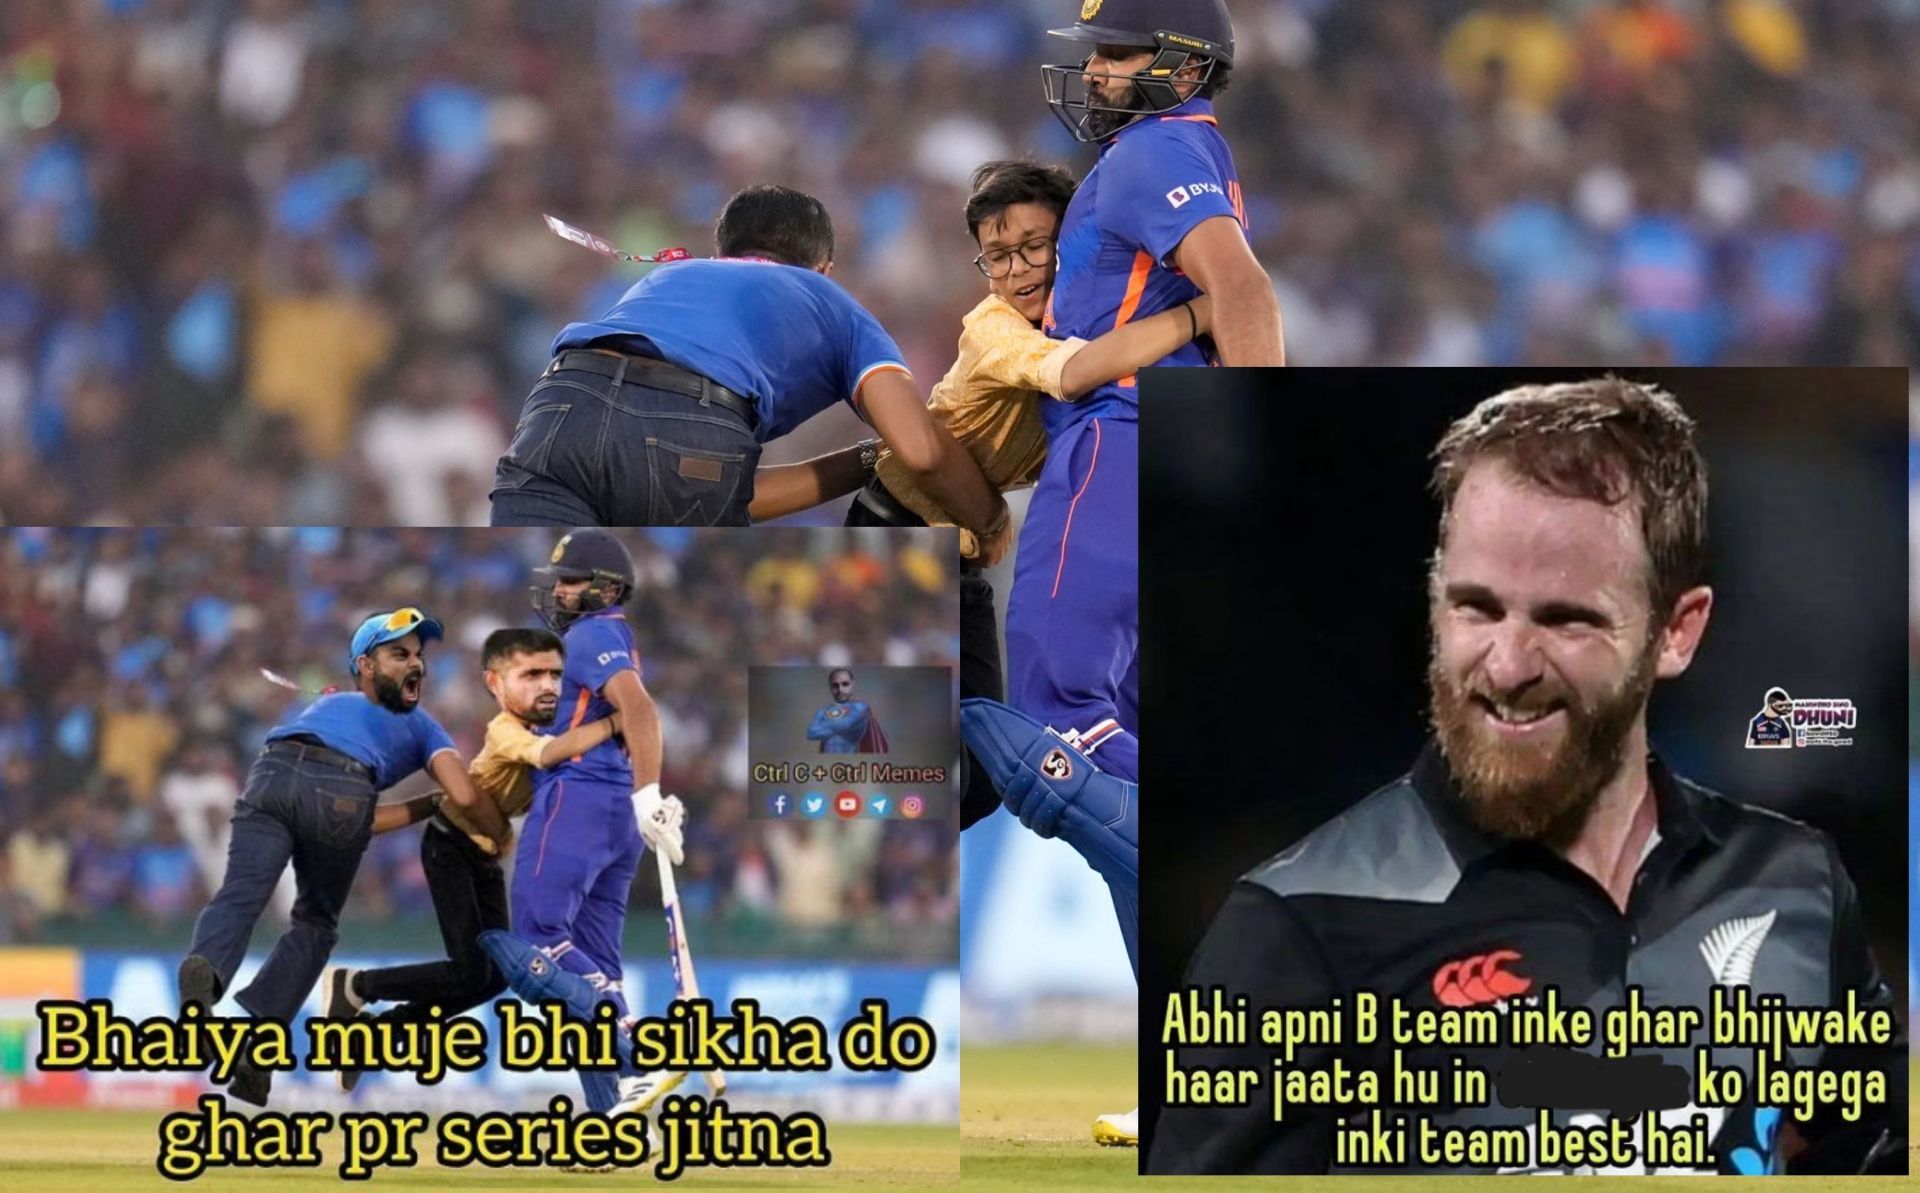 Fans react after India seal the 3-match ODI series against New Zealand on Saturday